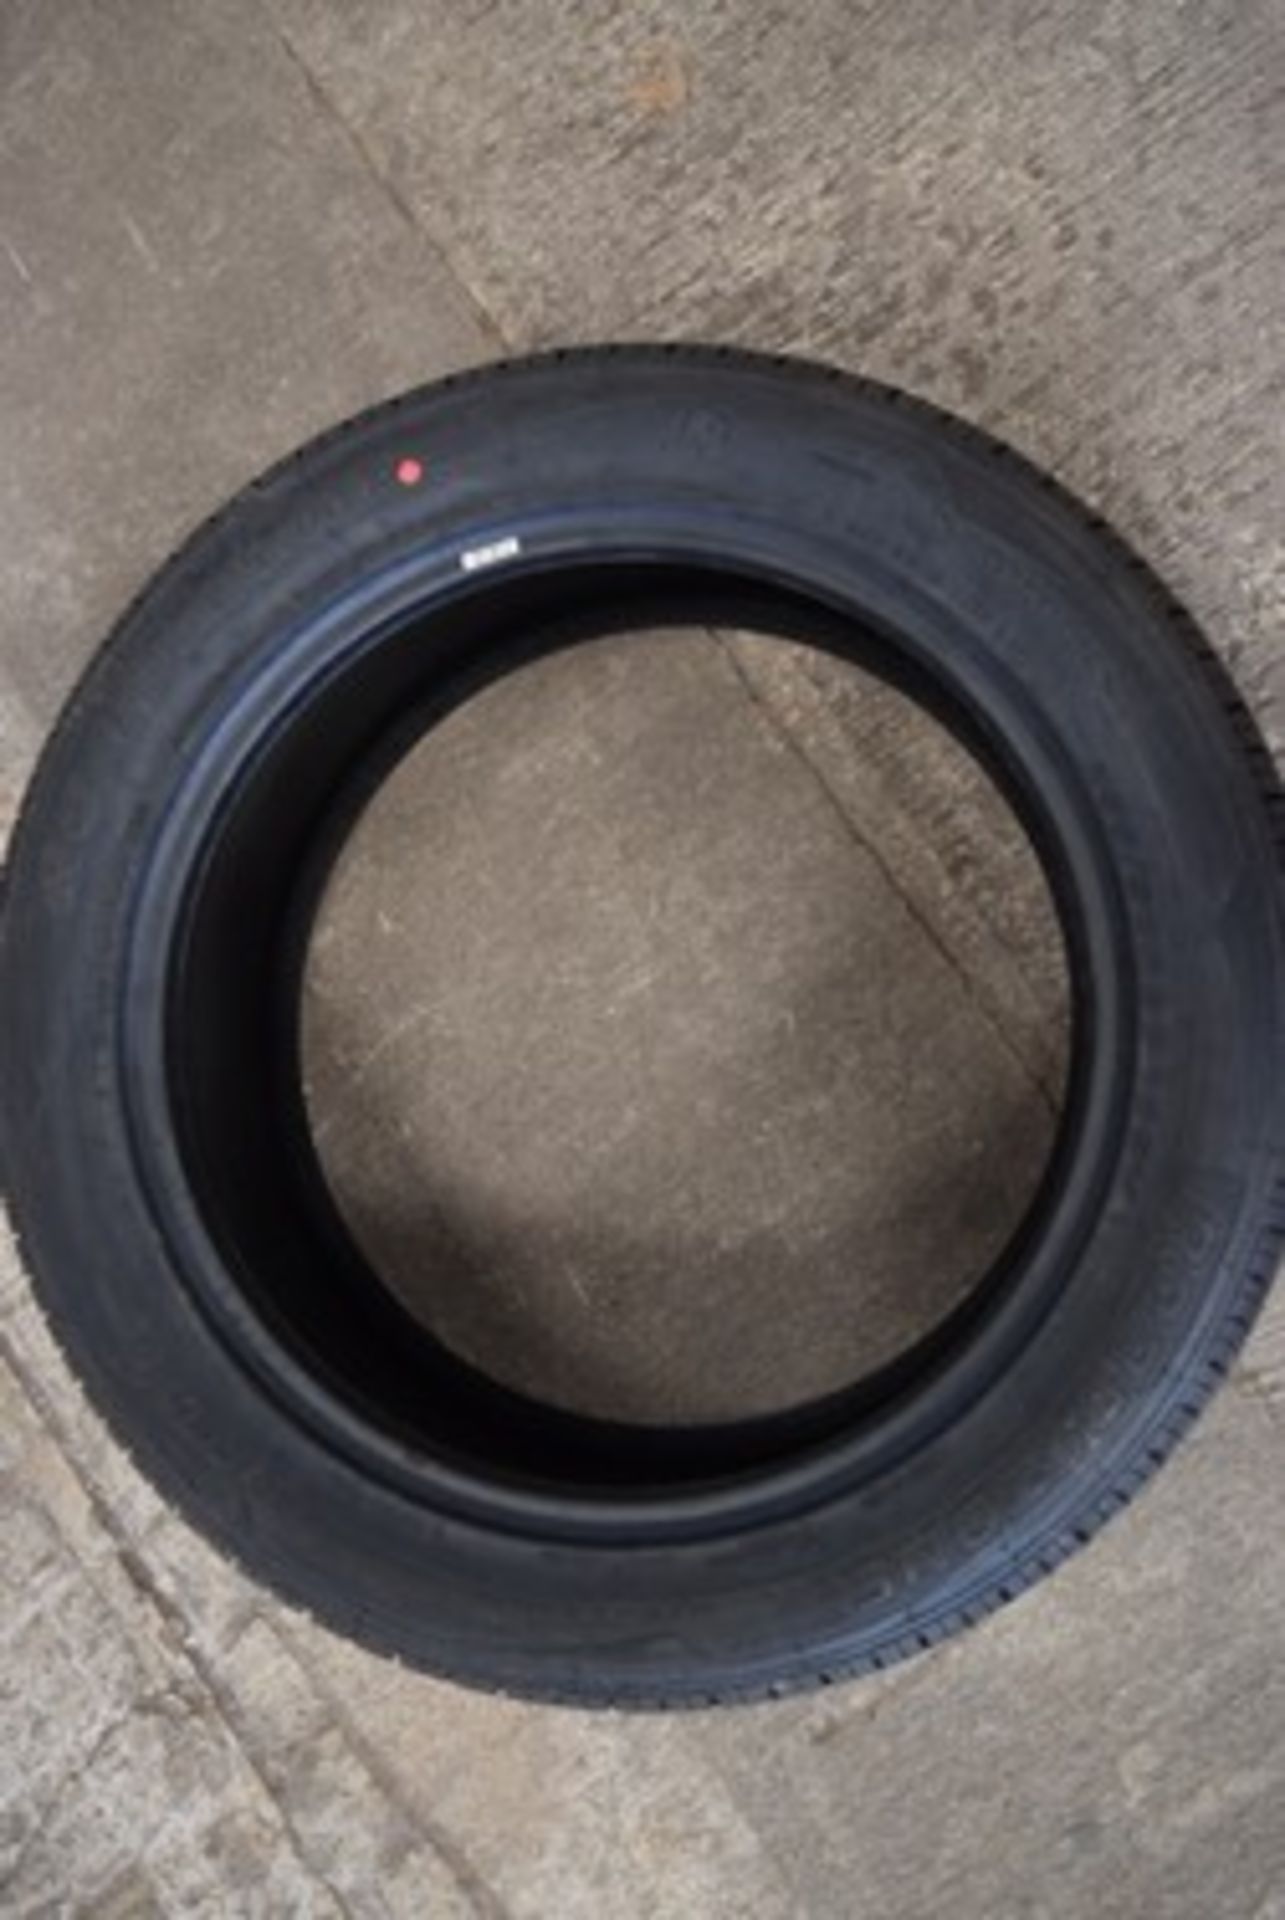 1 x Roadstone Roadian tyre, size 255/50R20 109V - New with label (pallet 1) - Image 2 of 2